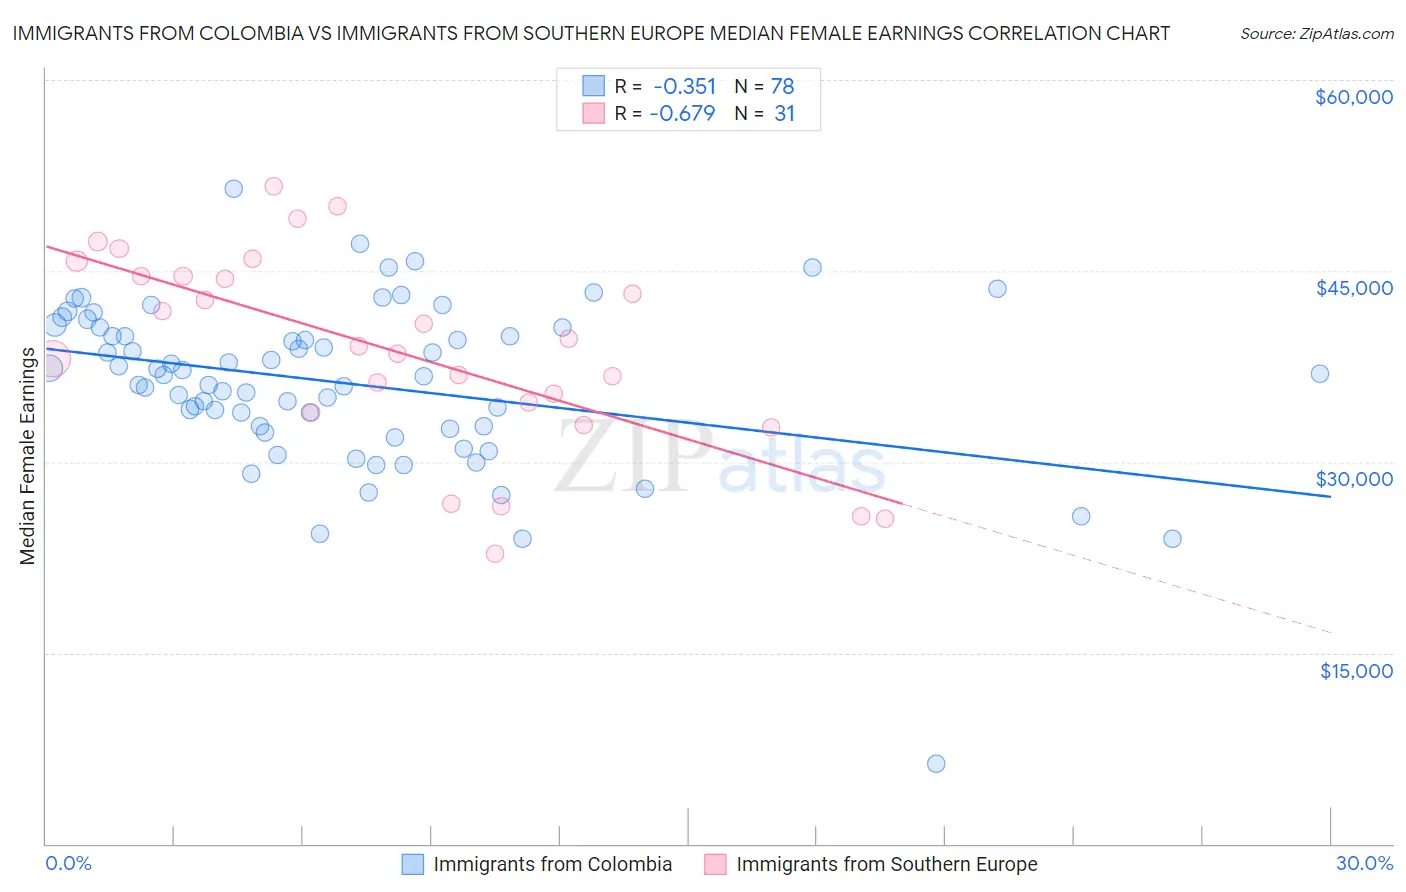 Immigrants from Colombia vs Immigrants from Southern Europe Median Female Earnings